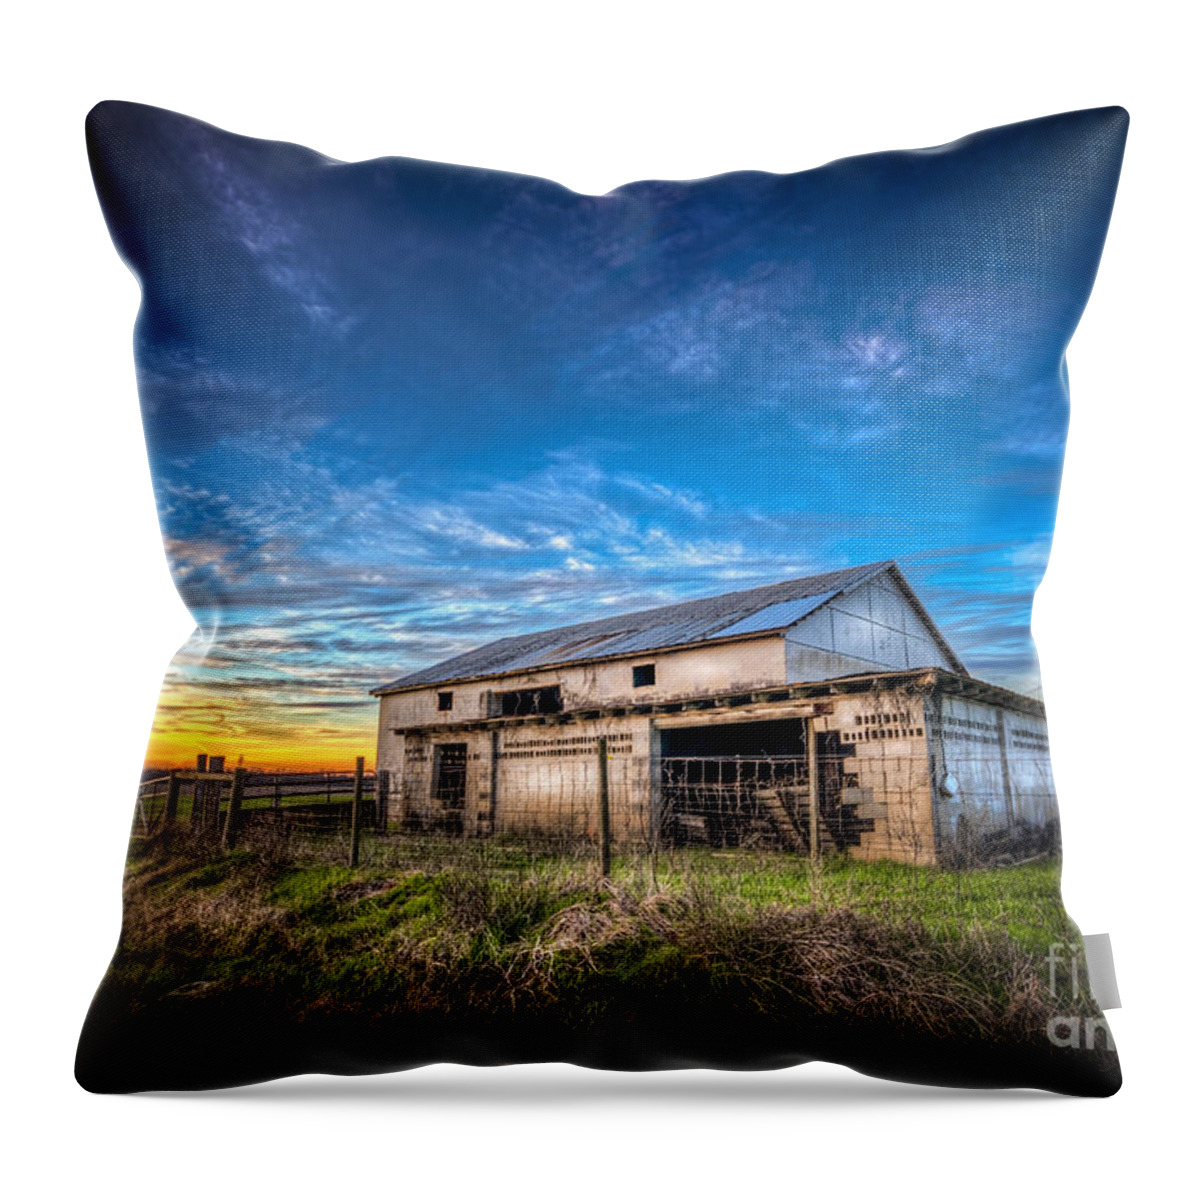 Farmland Throw Pillow featuring the photograph This Old Barn by Marvin Spates